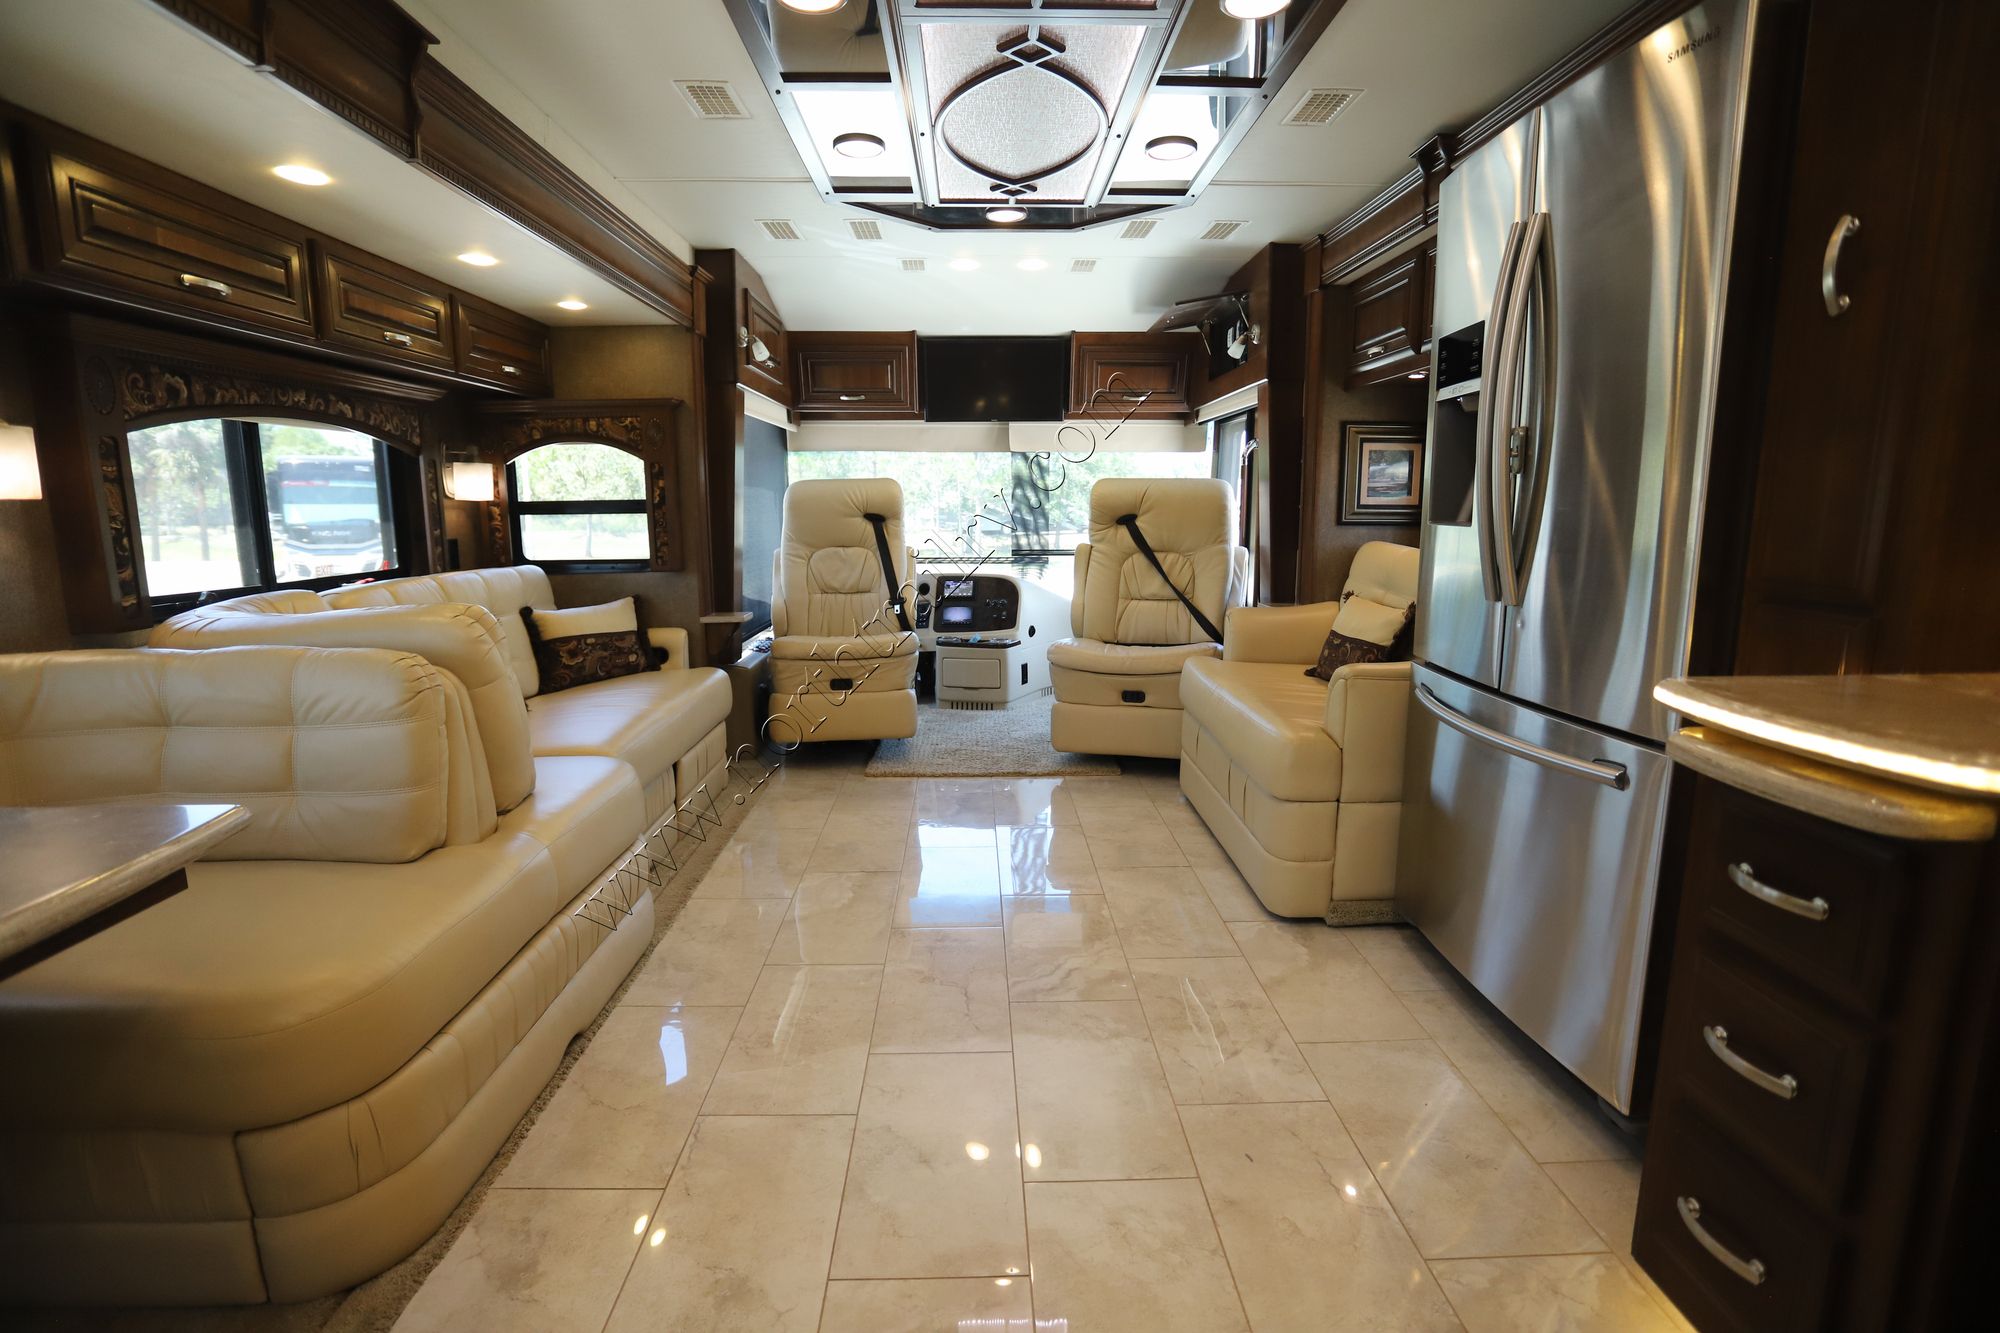 Used 2016 Entegra Anthem 42RBQ Class A  For Sale